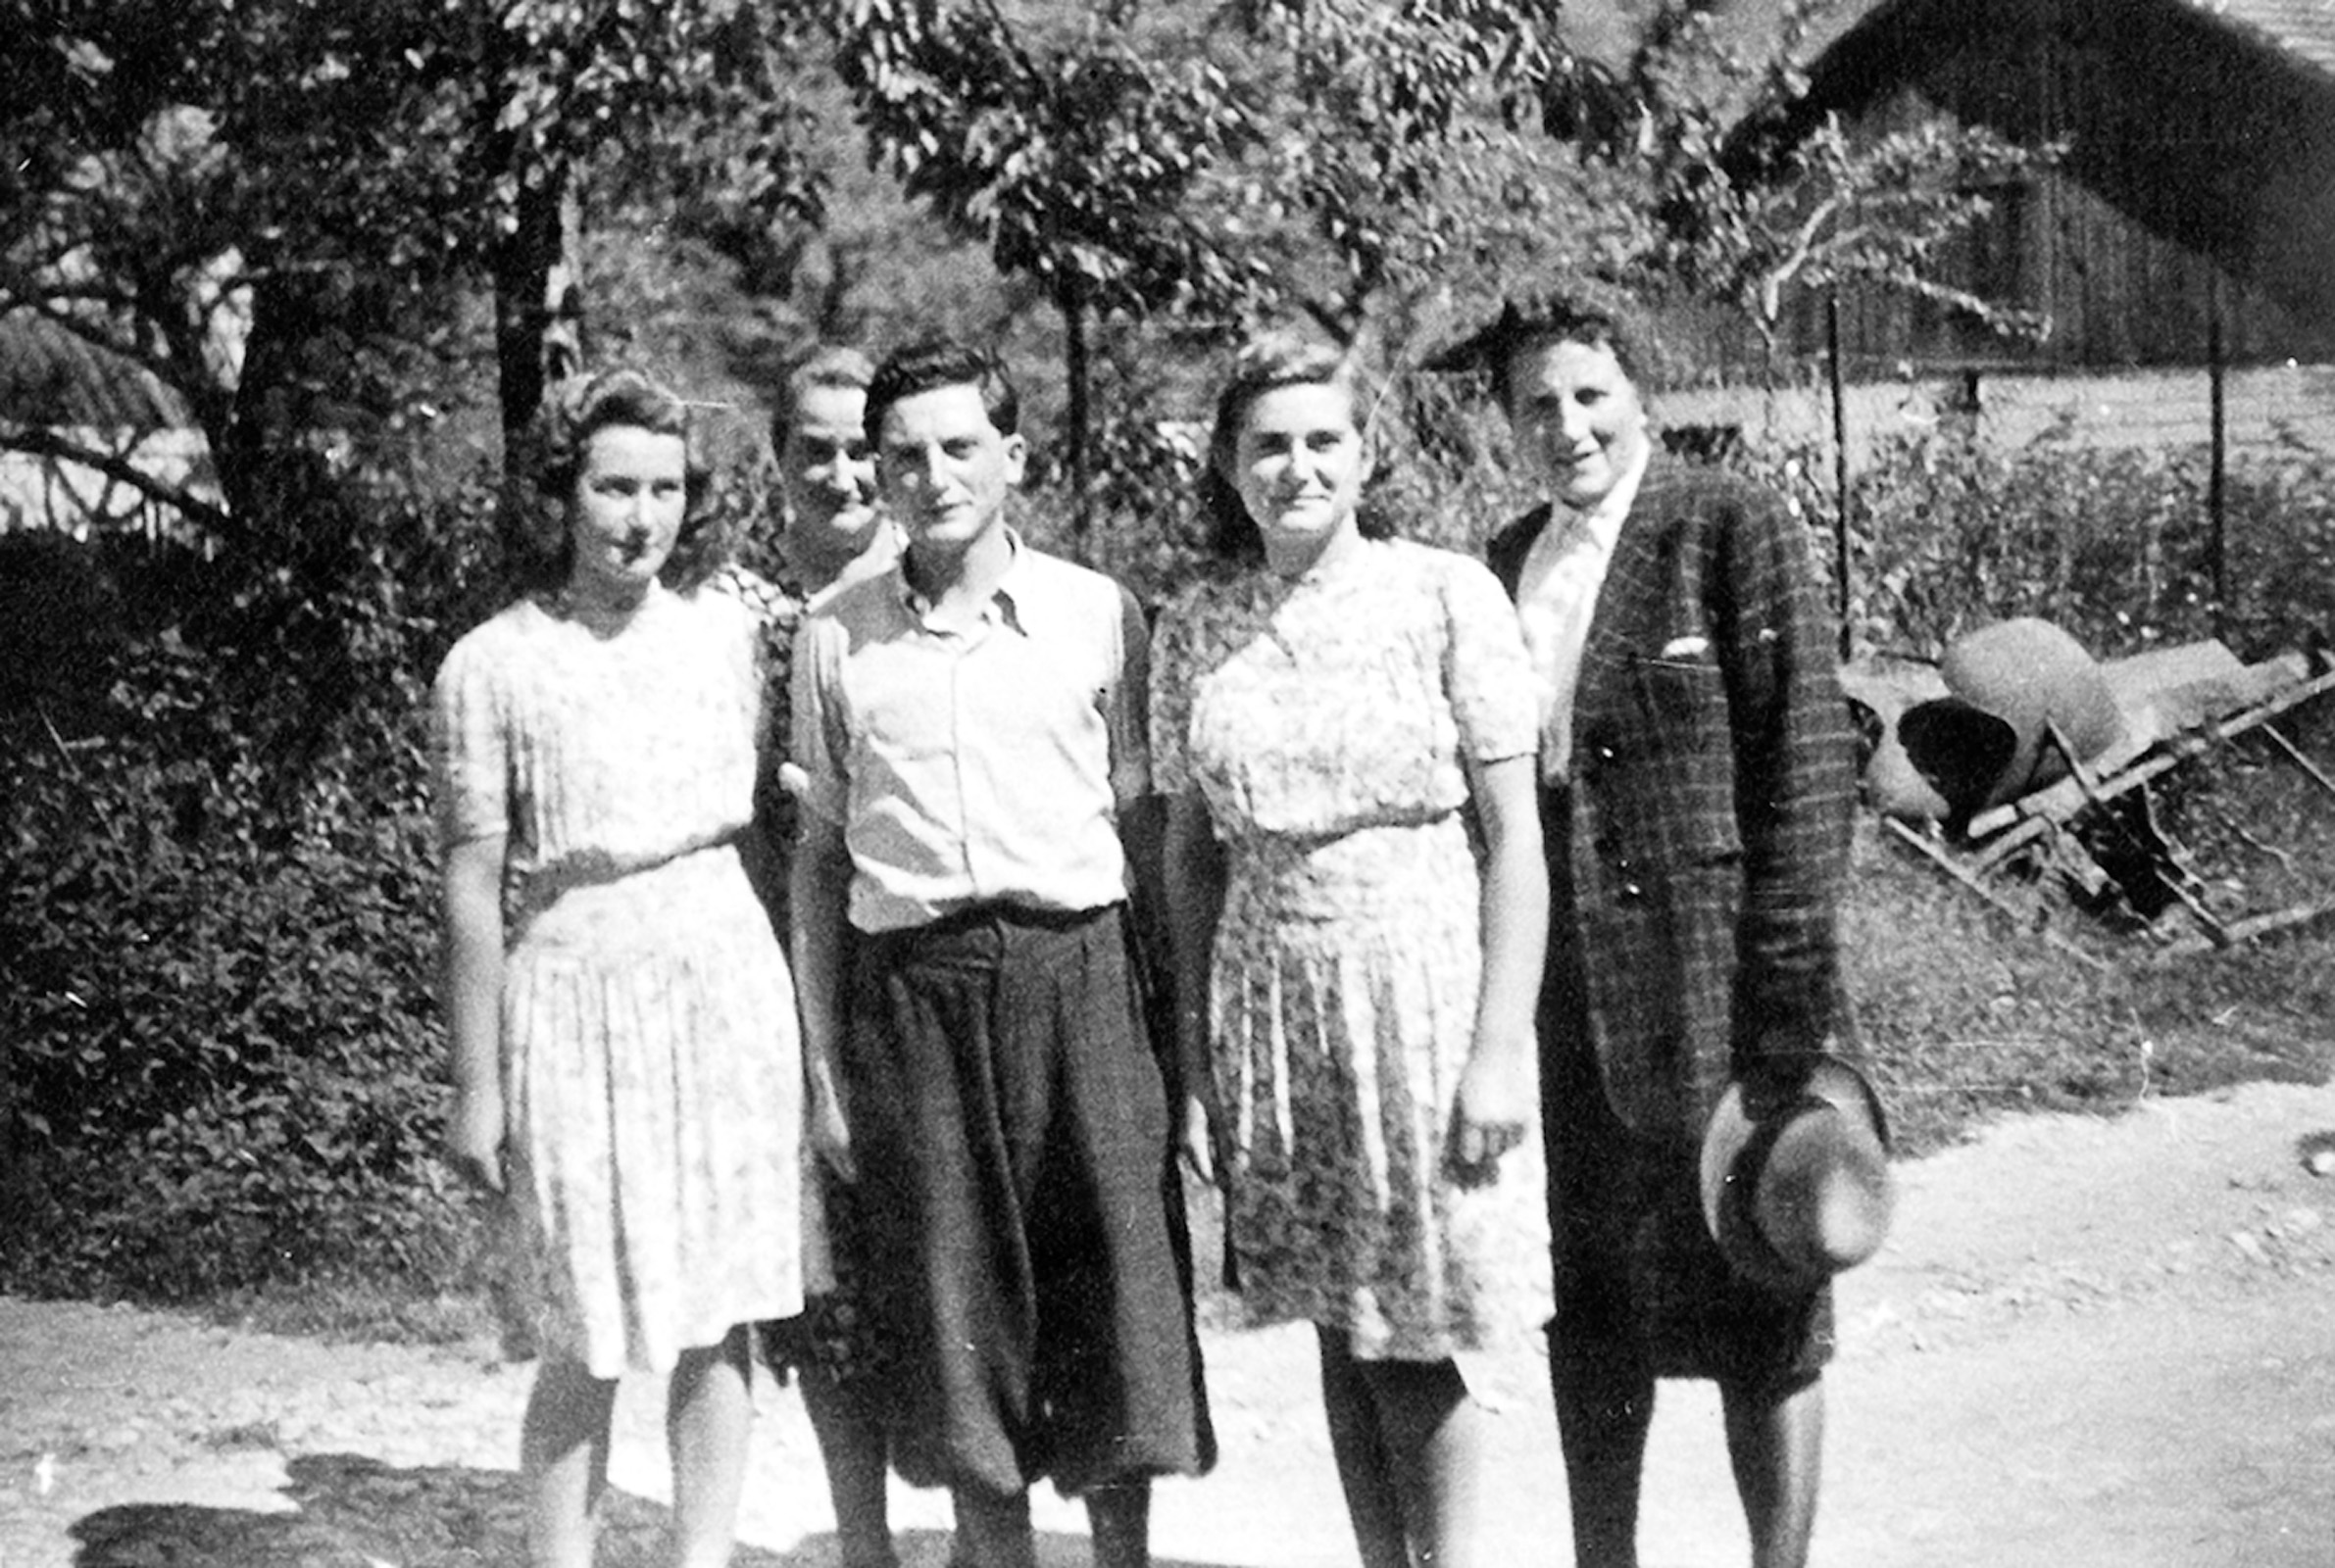 Sally Lemberger with, from left to right, Ruth, Maria, and Margarethe Vögele, and Bertha Schwarz in Rexingen, 1945.